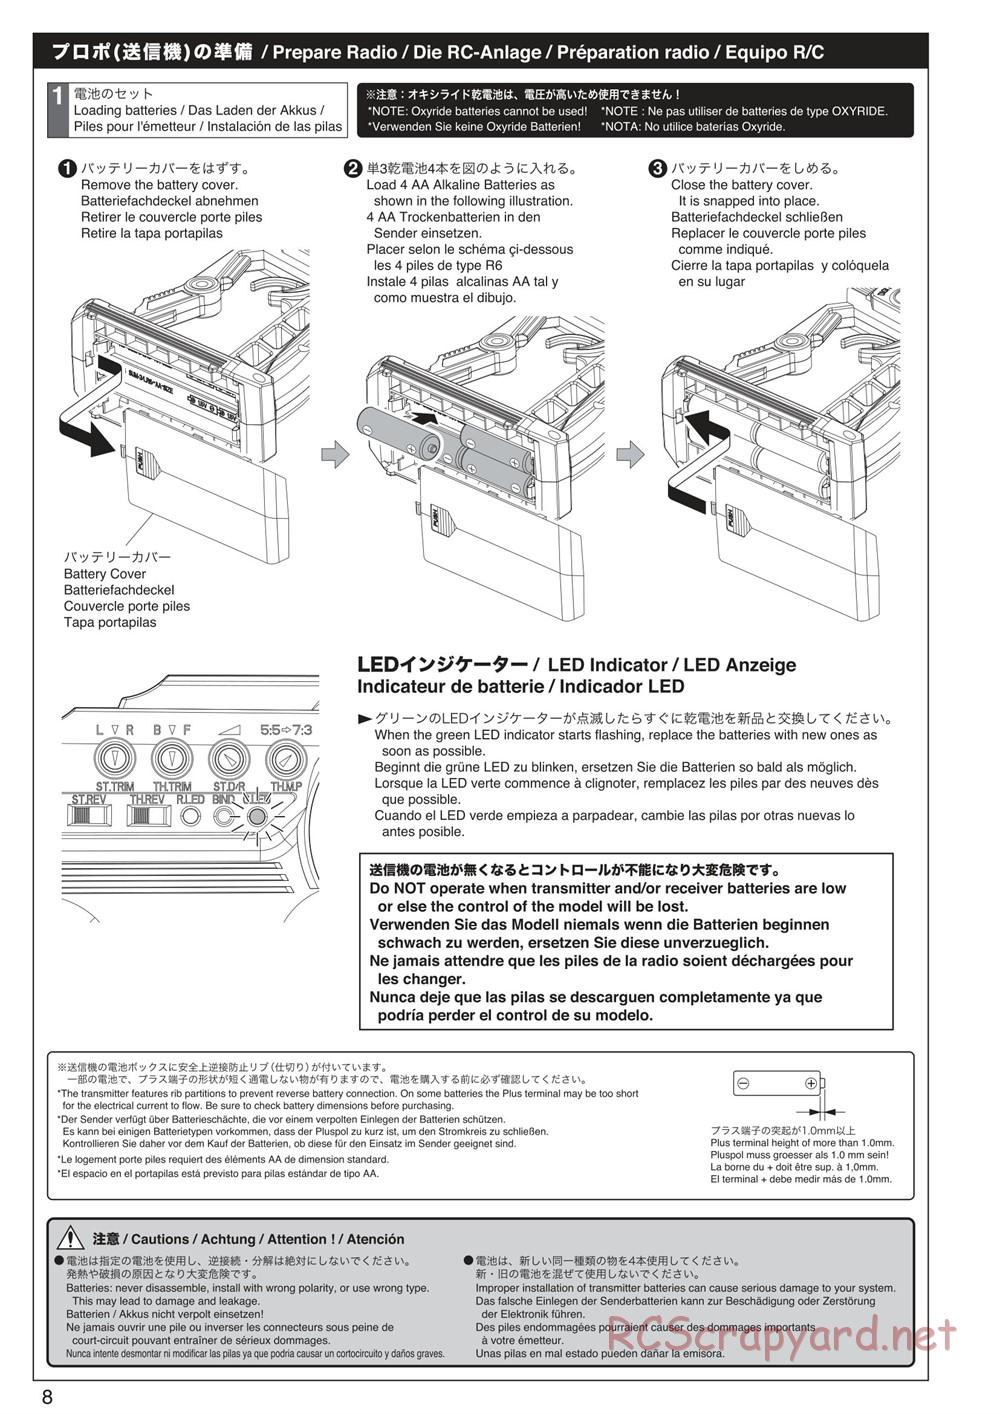 Kyosho - Monster Tracker EP - Manual - Page 8